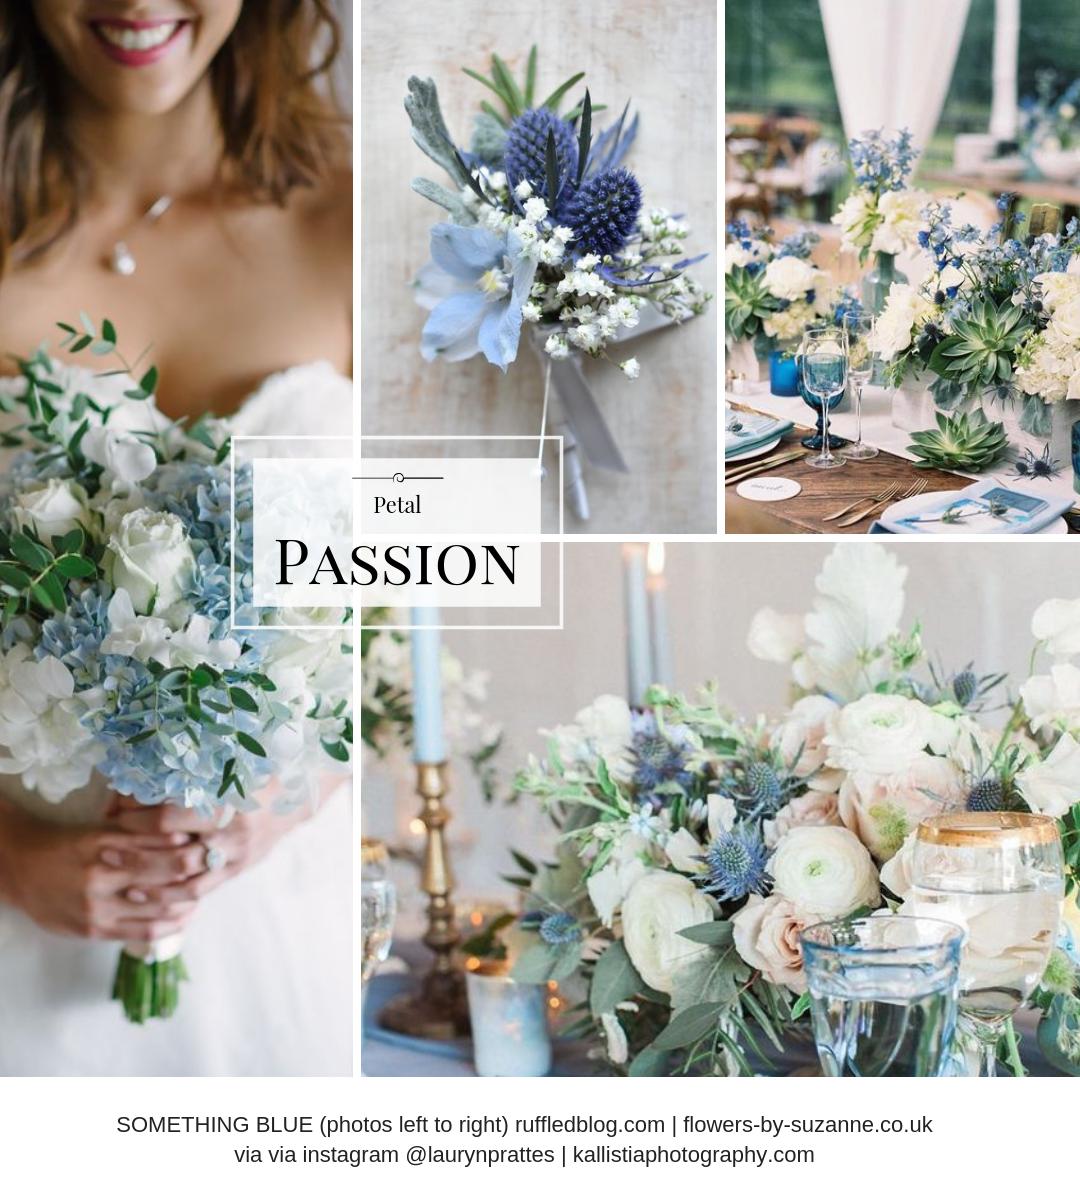 #GEMpetalpassion Something blue?
How about blue-hued florals for your special day?! 
 #weddingflowers #weddingplanning  #weddinginspiration #wedding #weddings #flowers #florals #floraltrends #weddingflowertrends #weddingdecor #bouquet #bridalbouquet #weddingideas